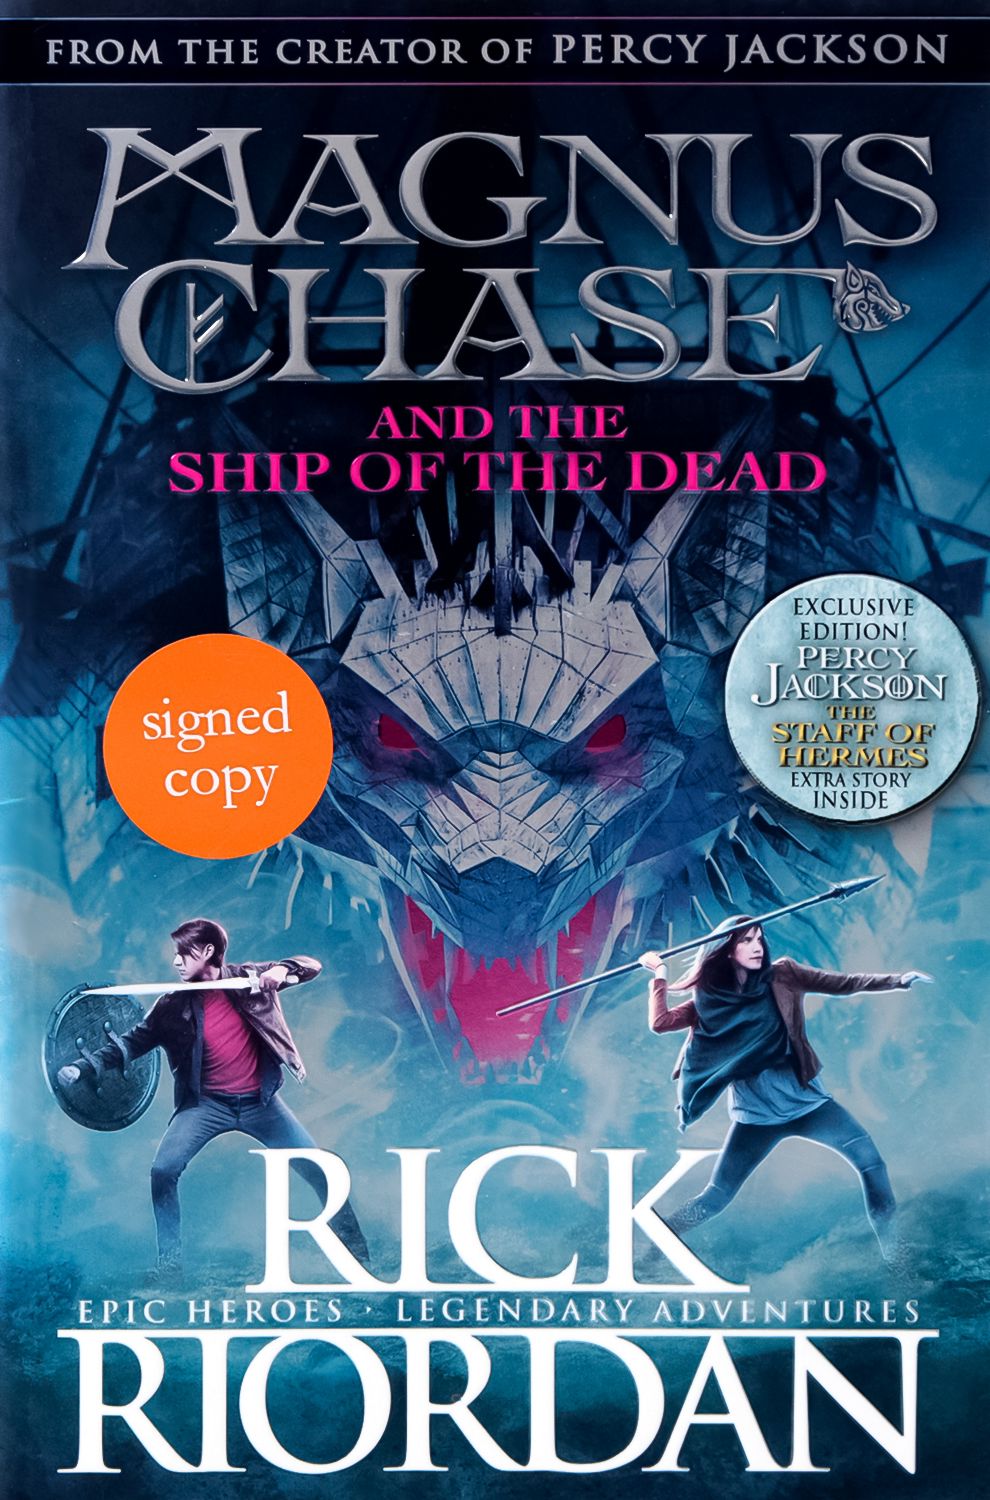 The Ship of the Dead by Rick Riordan